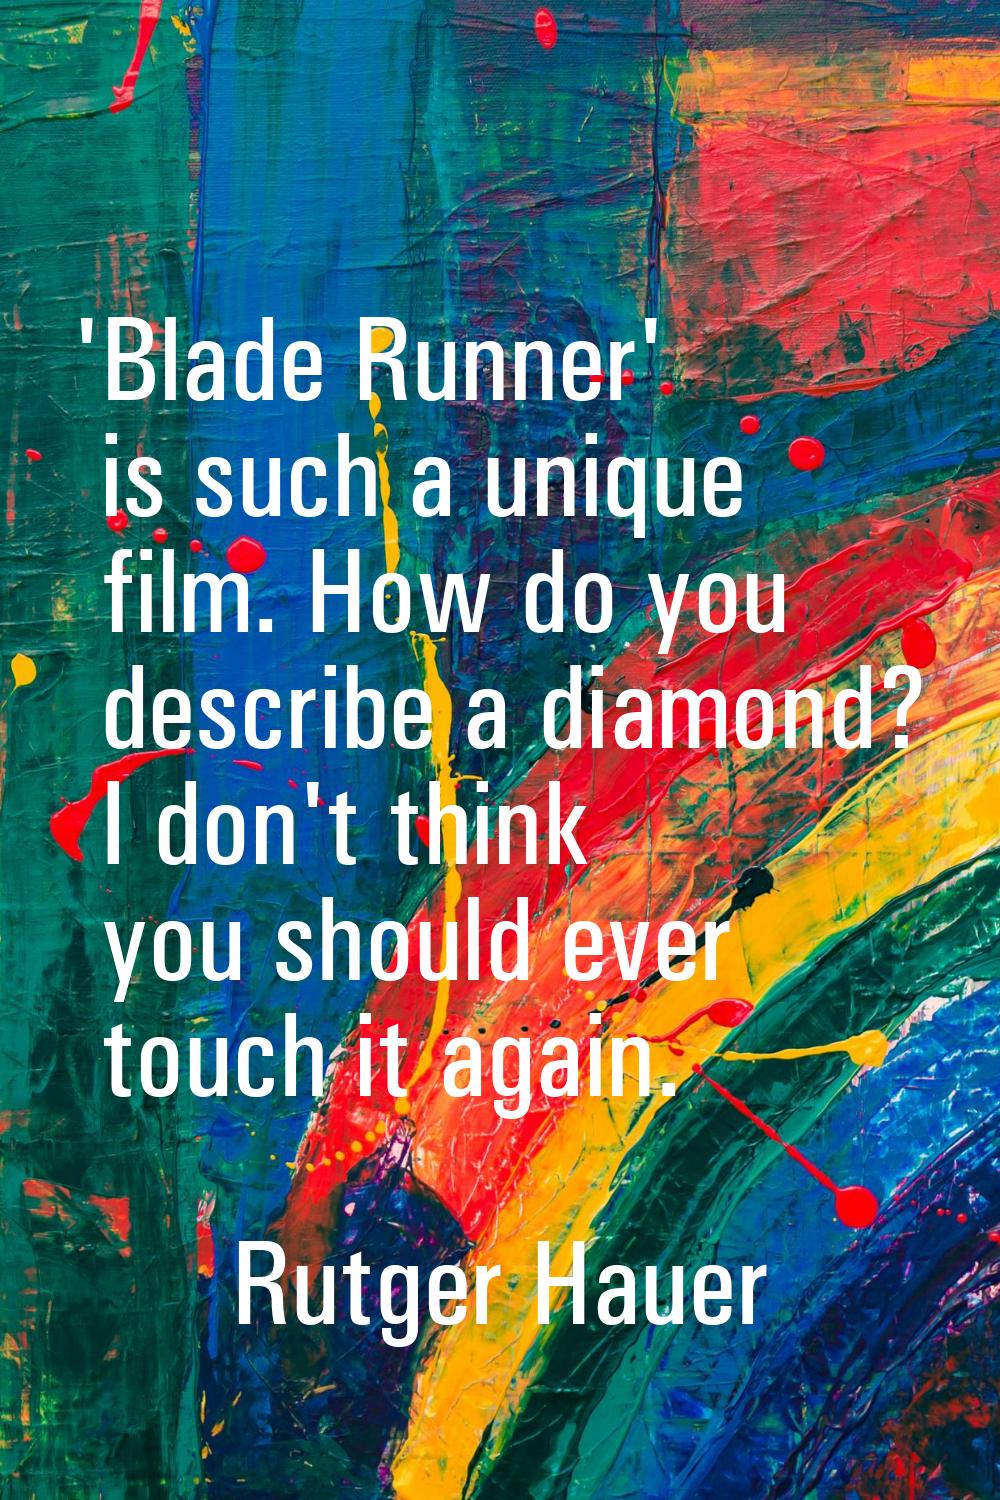 'Blade Runner' is such a unique film. How do you describe a diamond? I don't think you should ever 